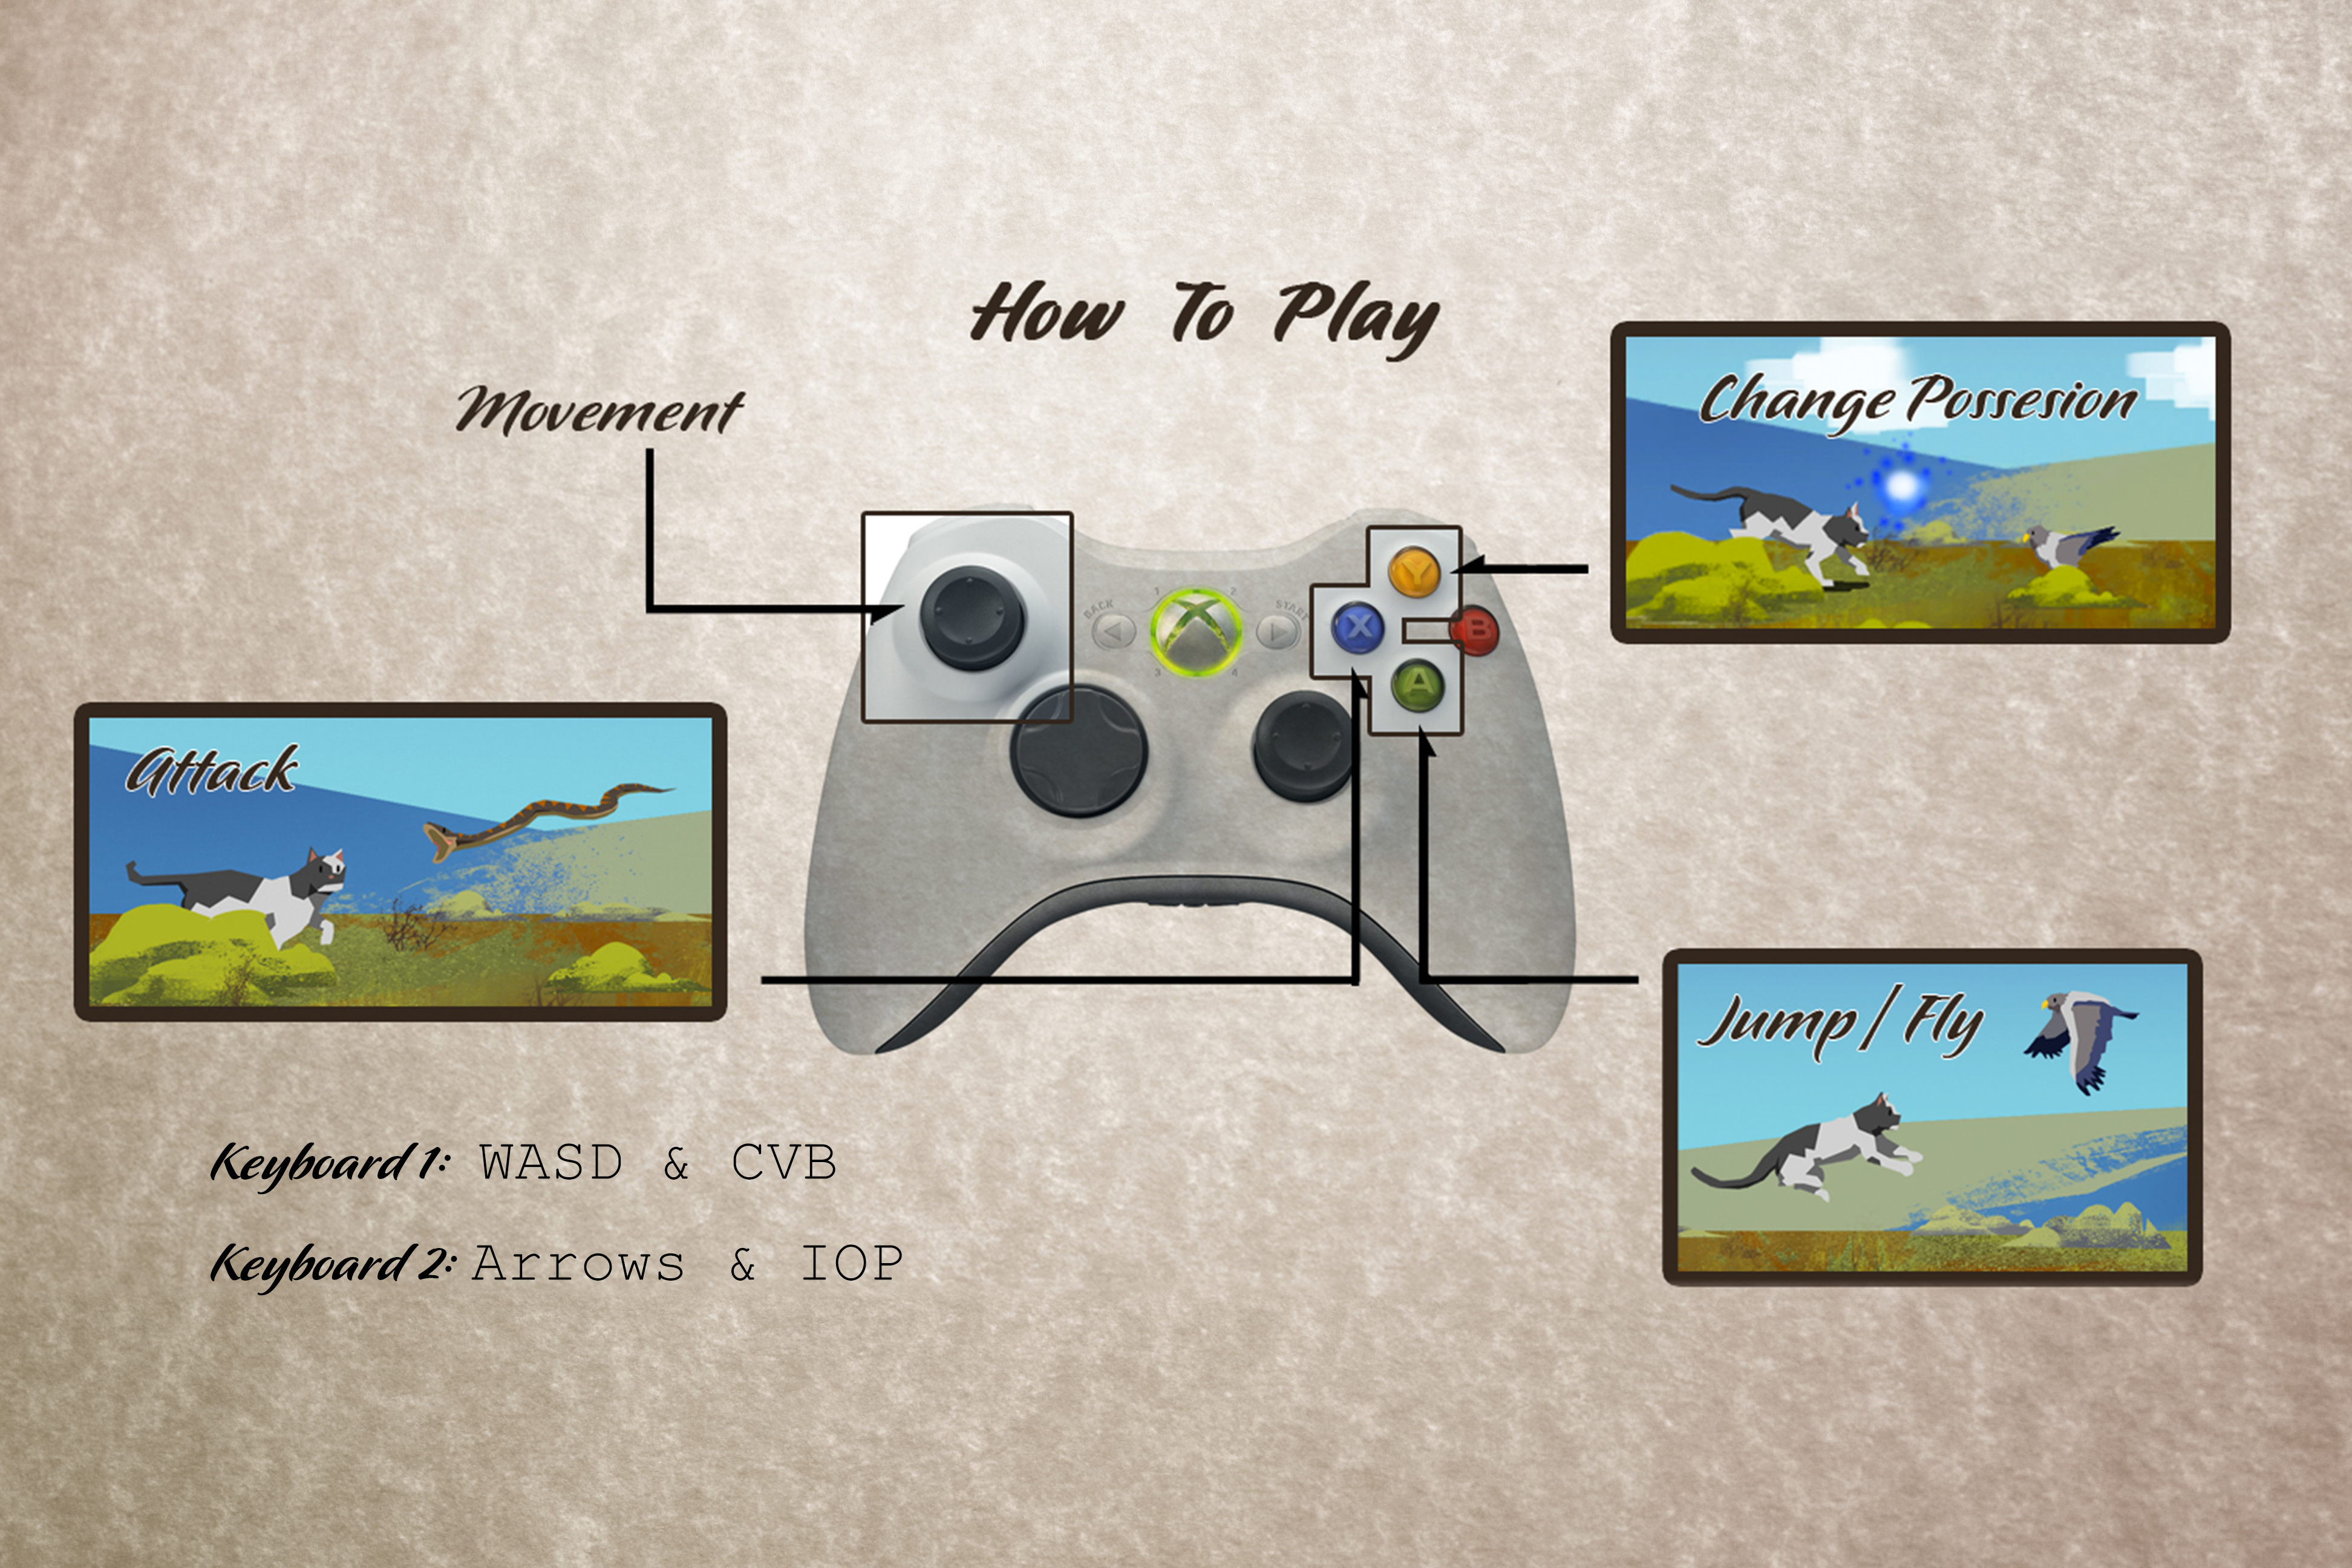 How To Play image